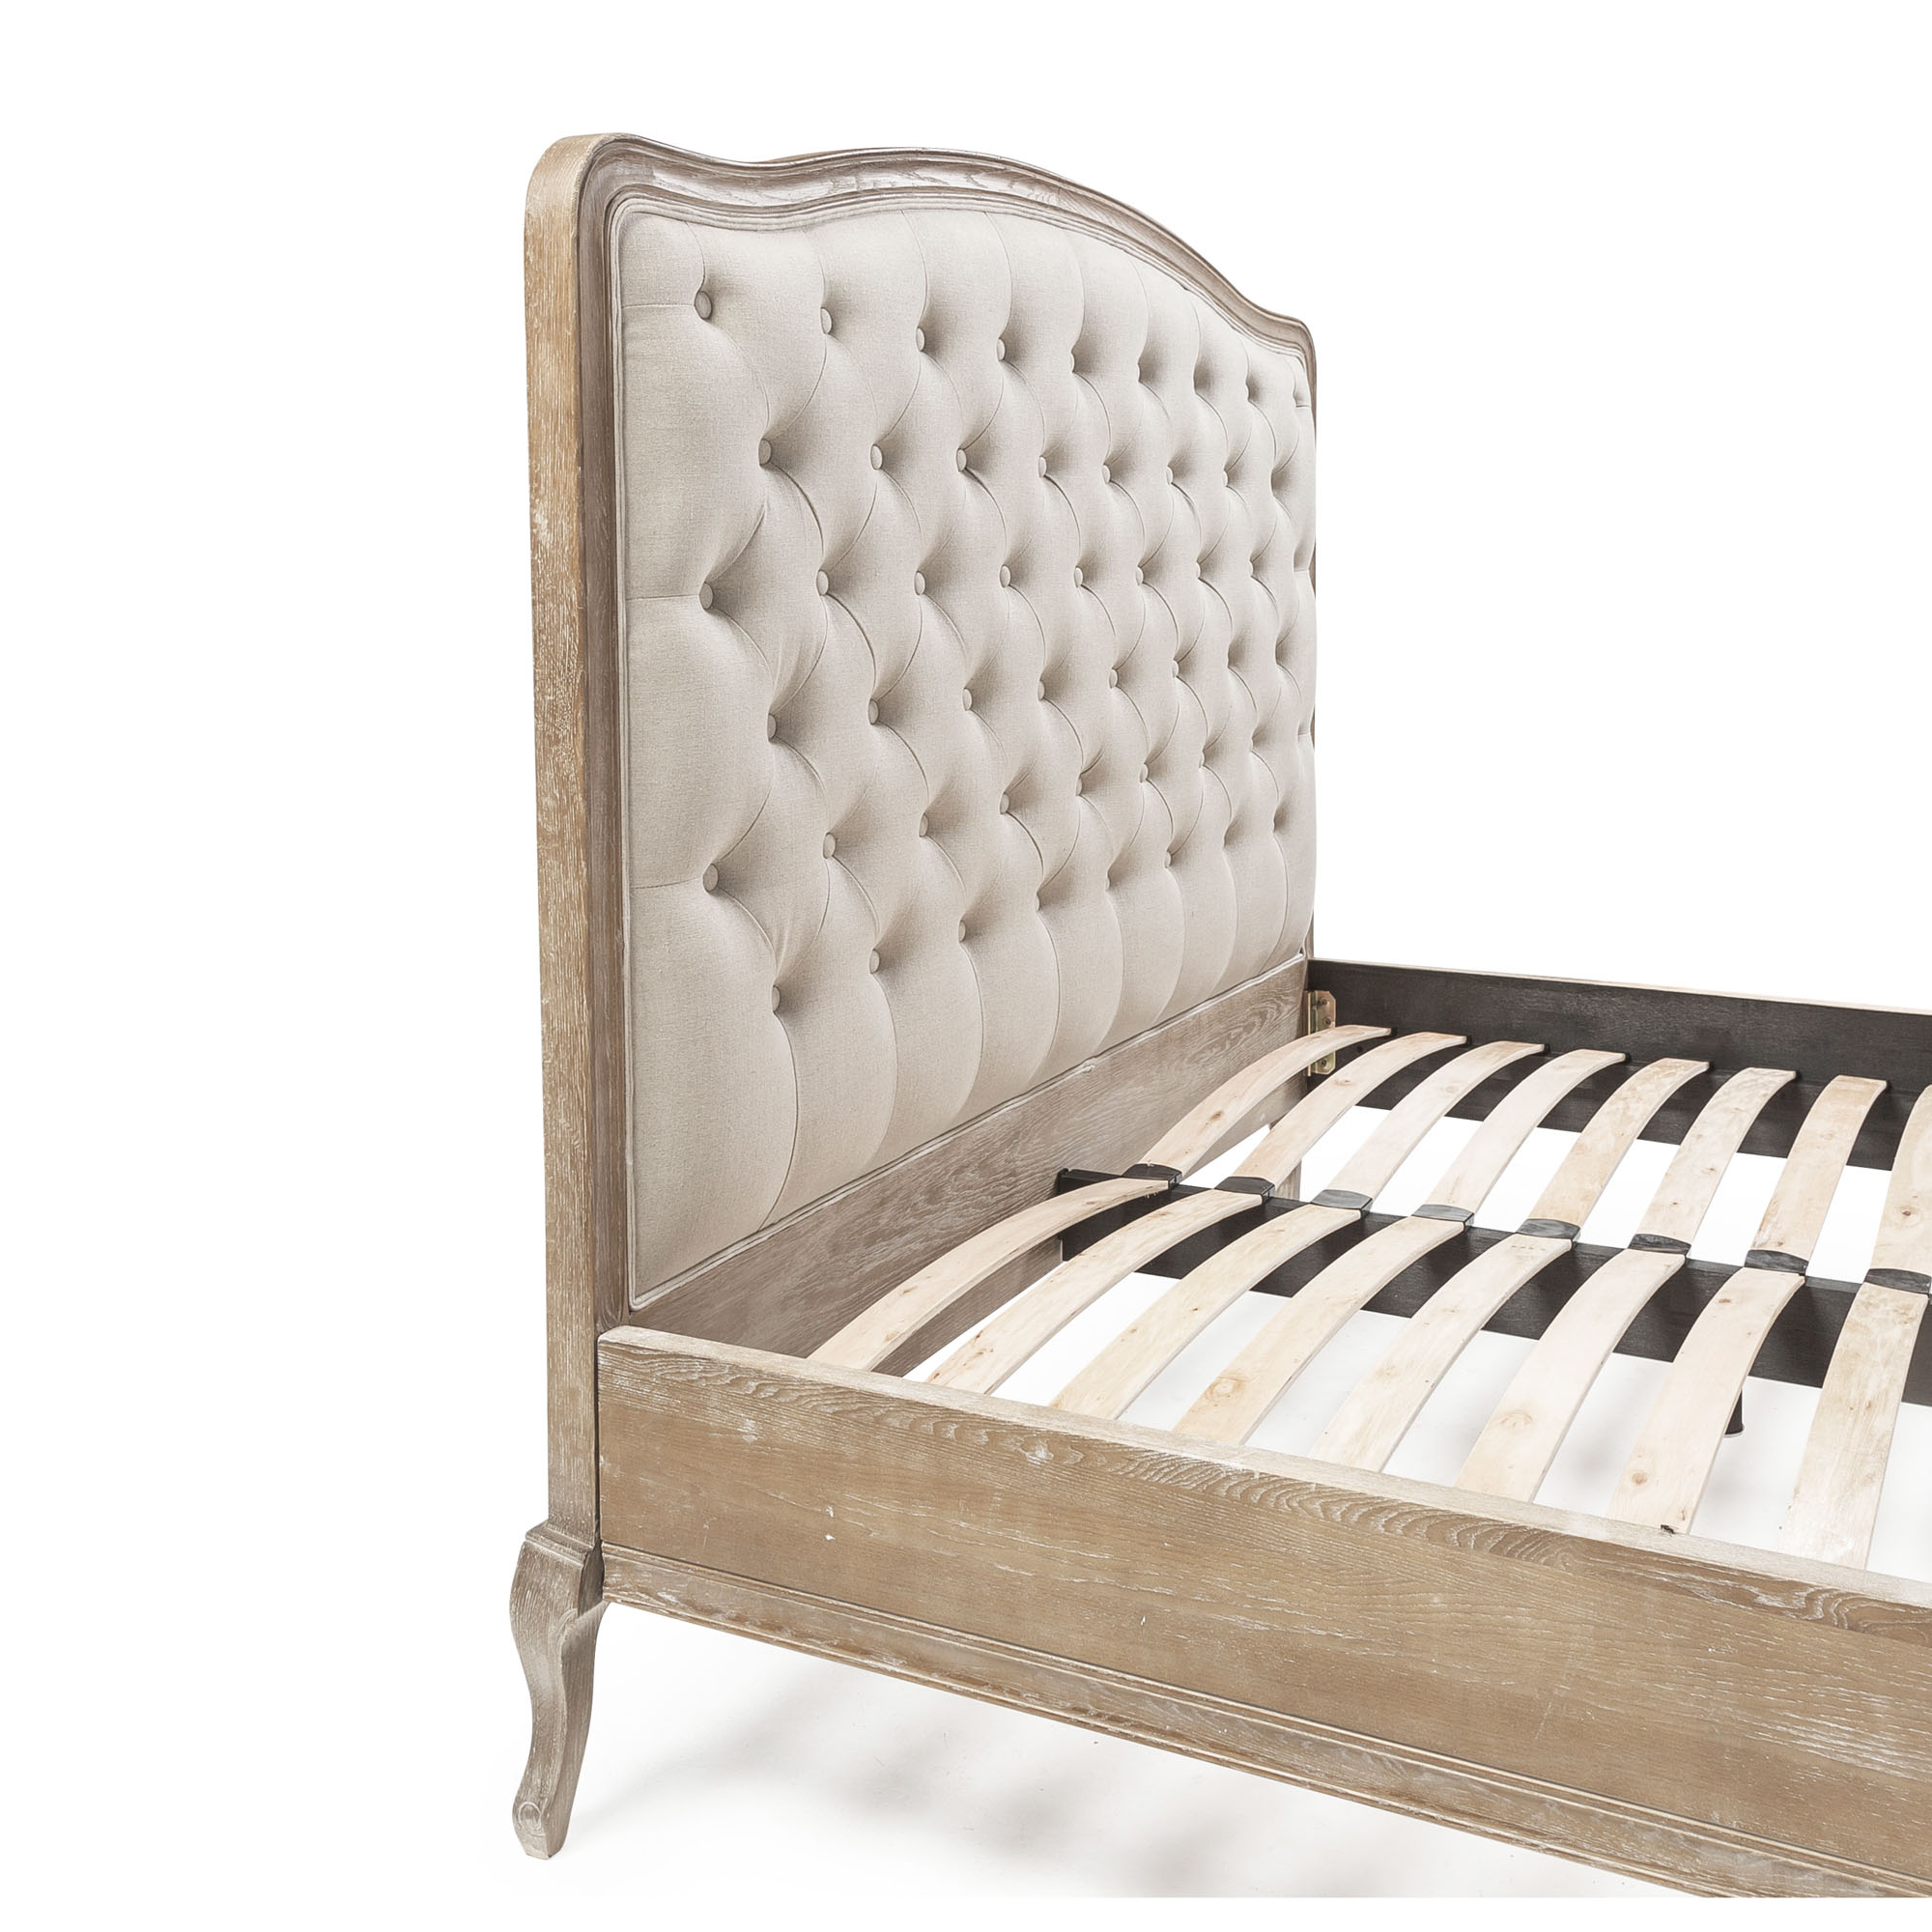 Arielle French Weathered Limed Ash Buttoned Upholstered High Foot Board Bed – Double Size